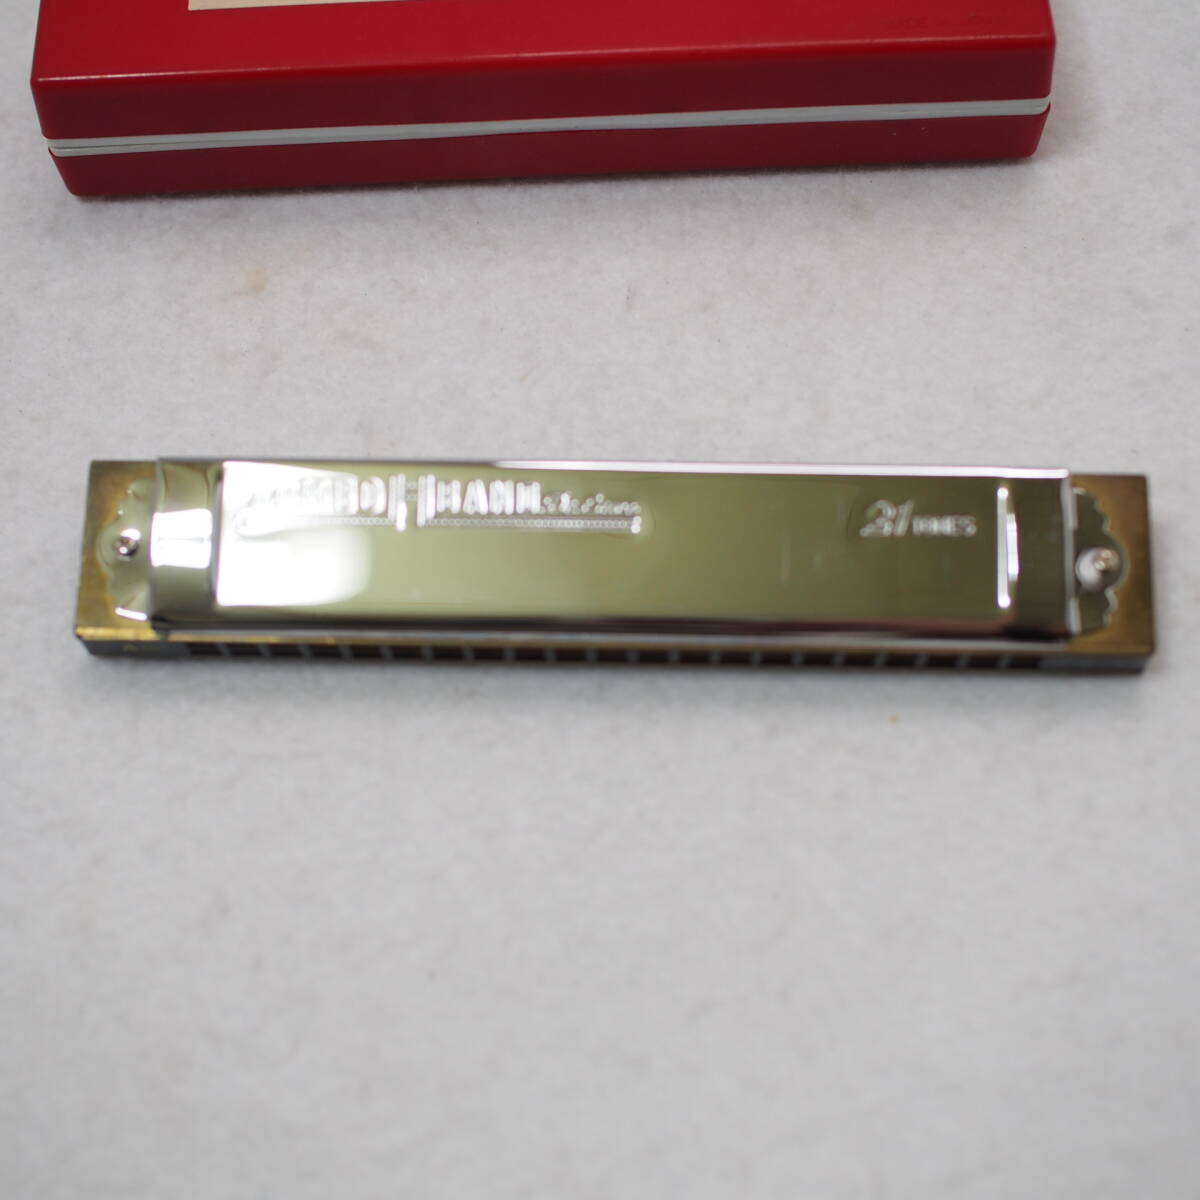 TOMBO BAND DELUXE harmonica 21 A minori short style Dragon-fly dragonfly band Deluxe Dragonfly minor case attaching control number 481-2